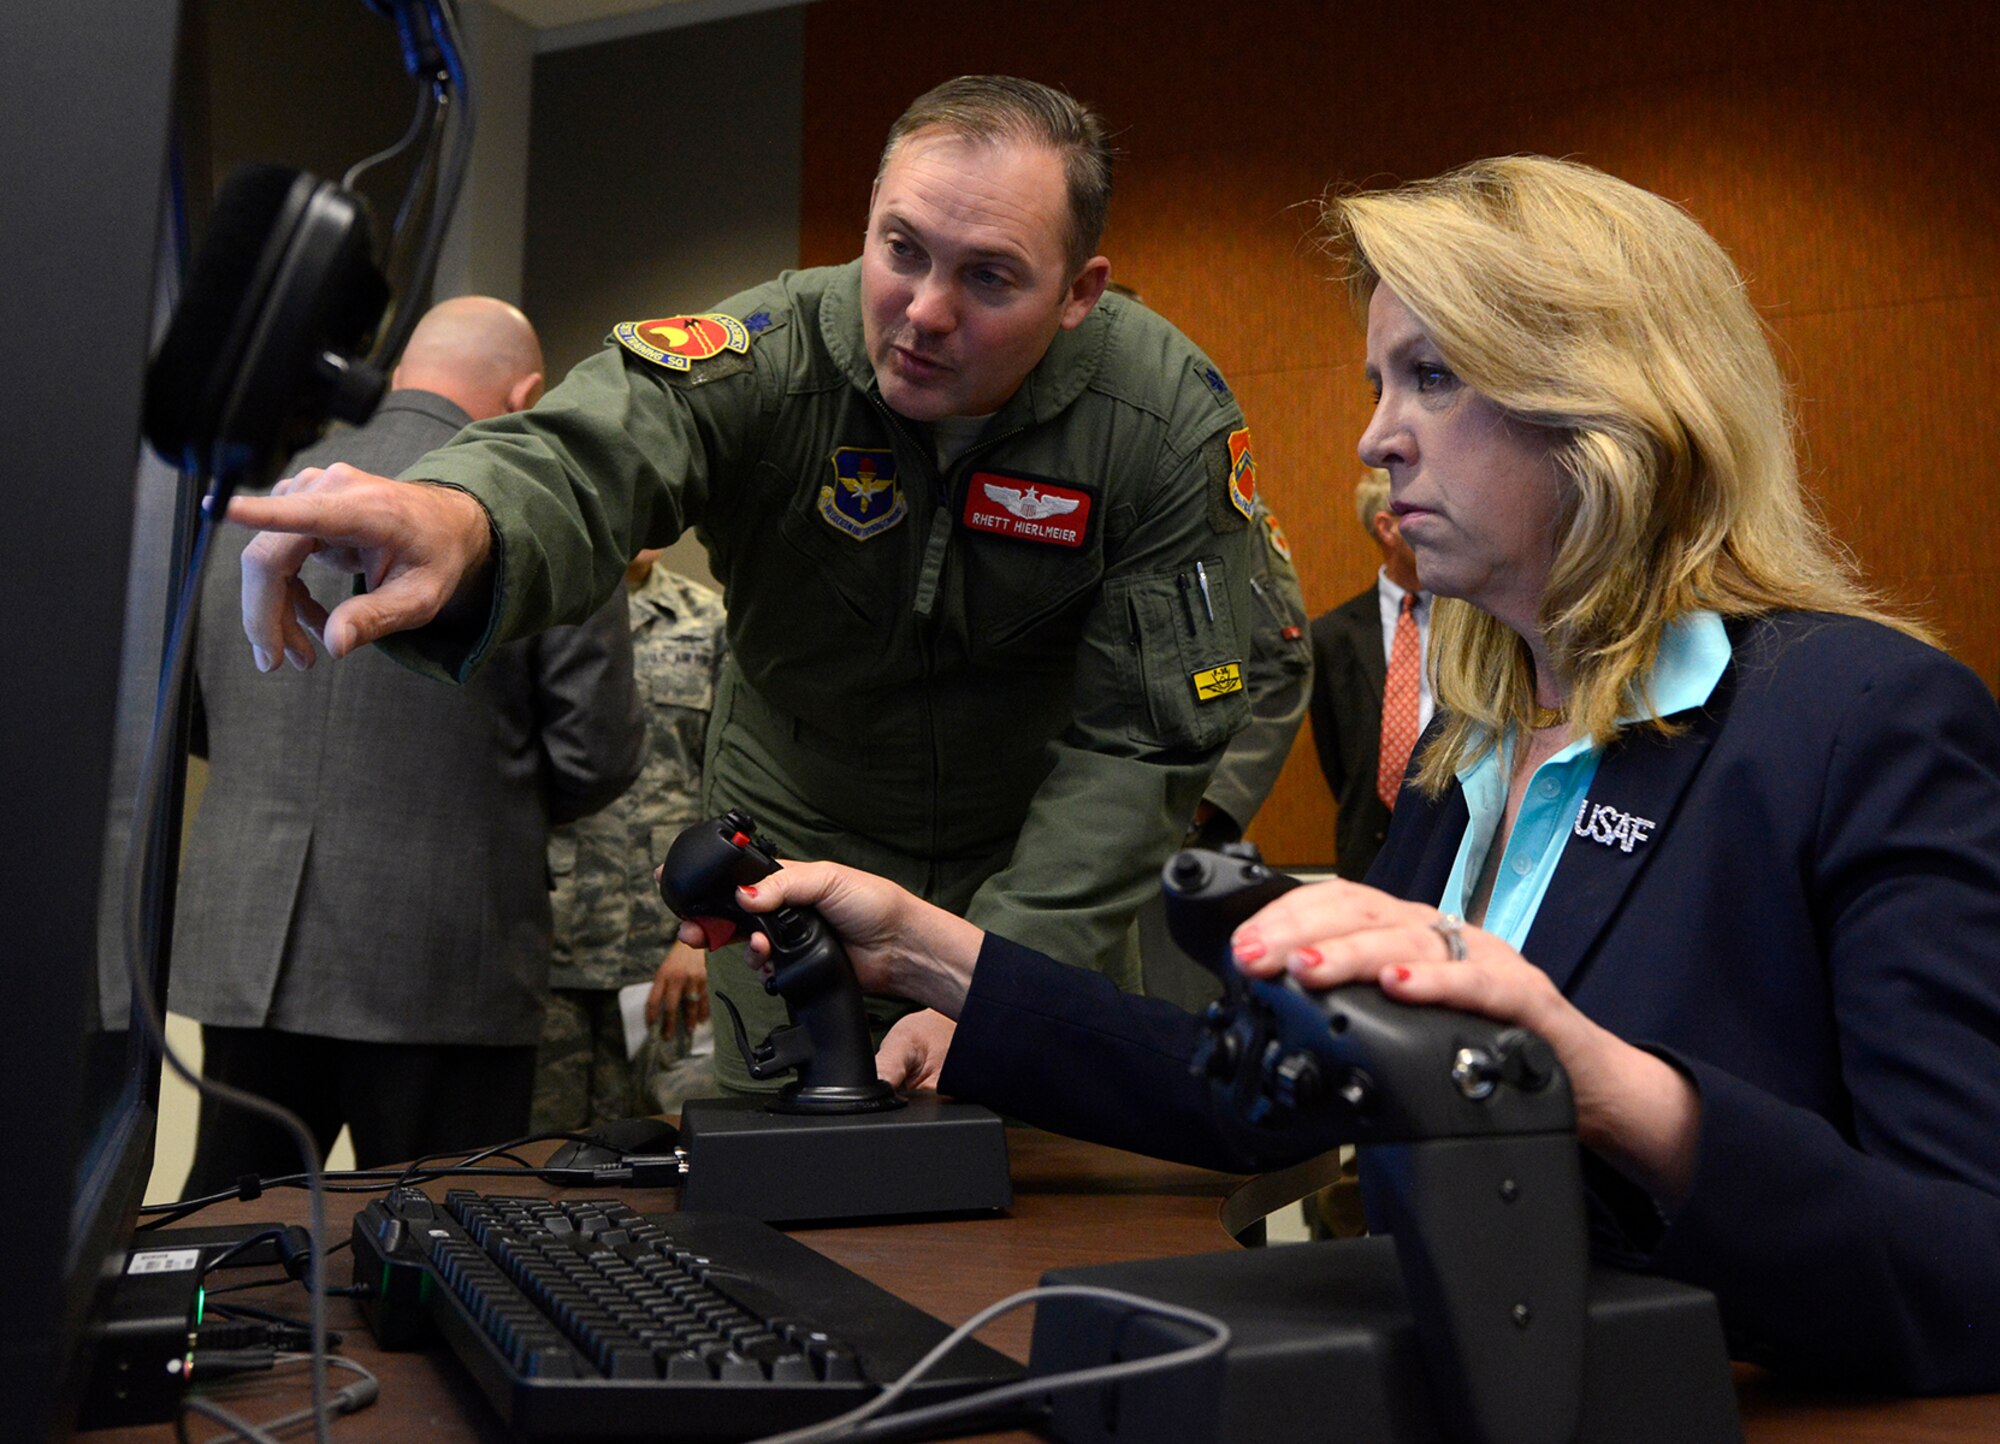 Secretary of the Air Force Deborah Lee James, receives instruction from Lt. Col. Rhett Hierlmeier, 56th Training Squadron director of operations on a flight simulator, March 10, 2016, at Luke Air Force Base, Ariz. James toured the Academic Training Center and received briefings on the progress of F-35 Lightning II operations, pilot training, and simulators. (U.S. Air Force photo by Senior Airman Devante Williams)